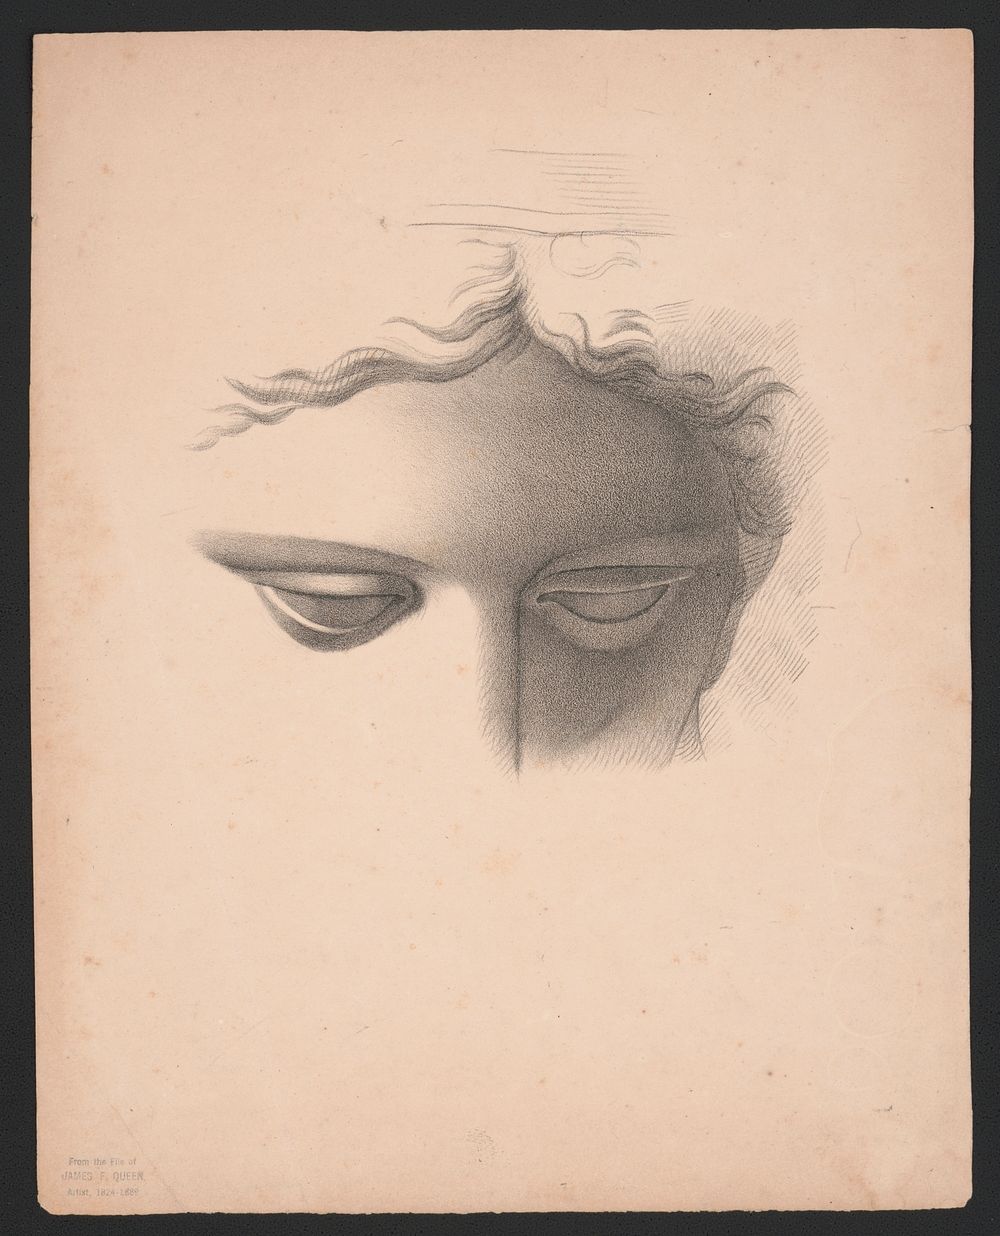 [Apollo Belvidere, study showing the forehead, eyes, and bridge of nose] by James Fuller Queen (1820 or 1821-1886)